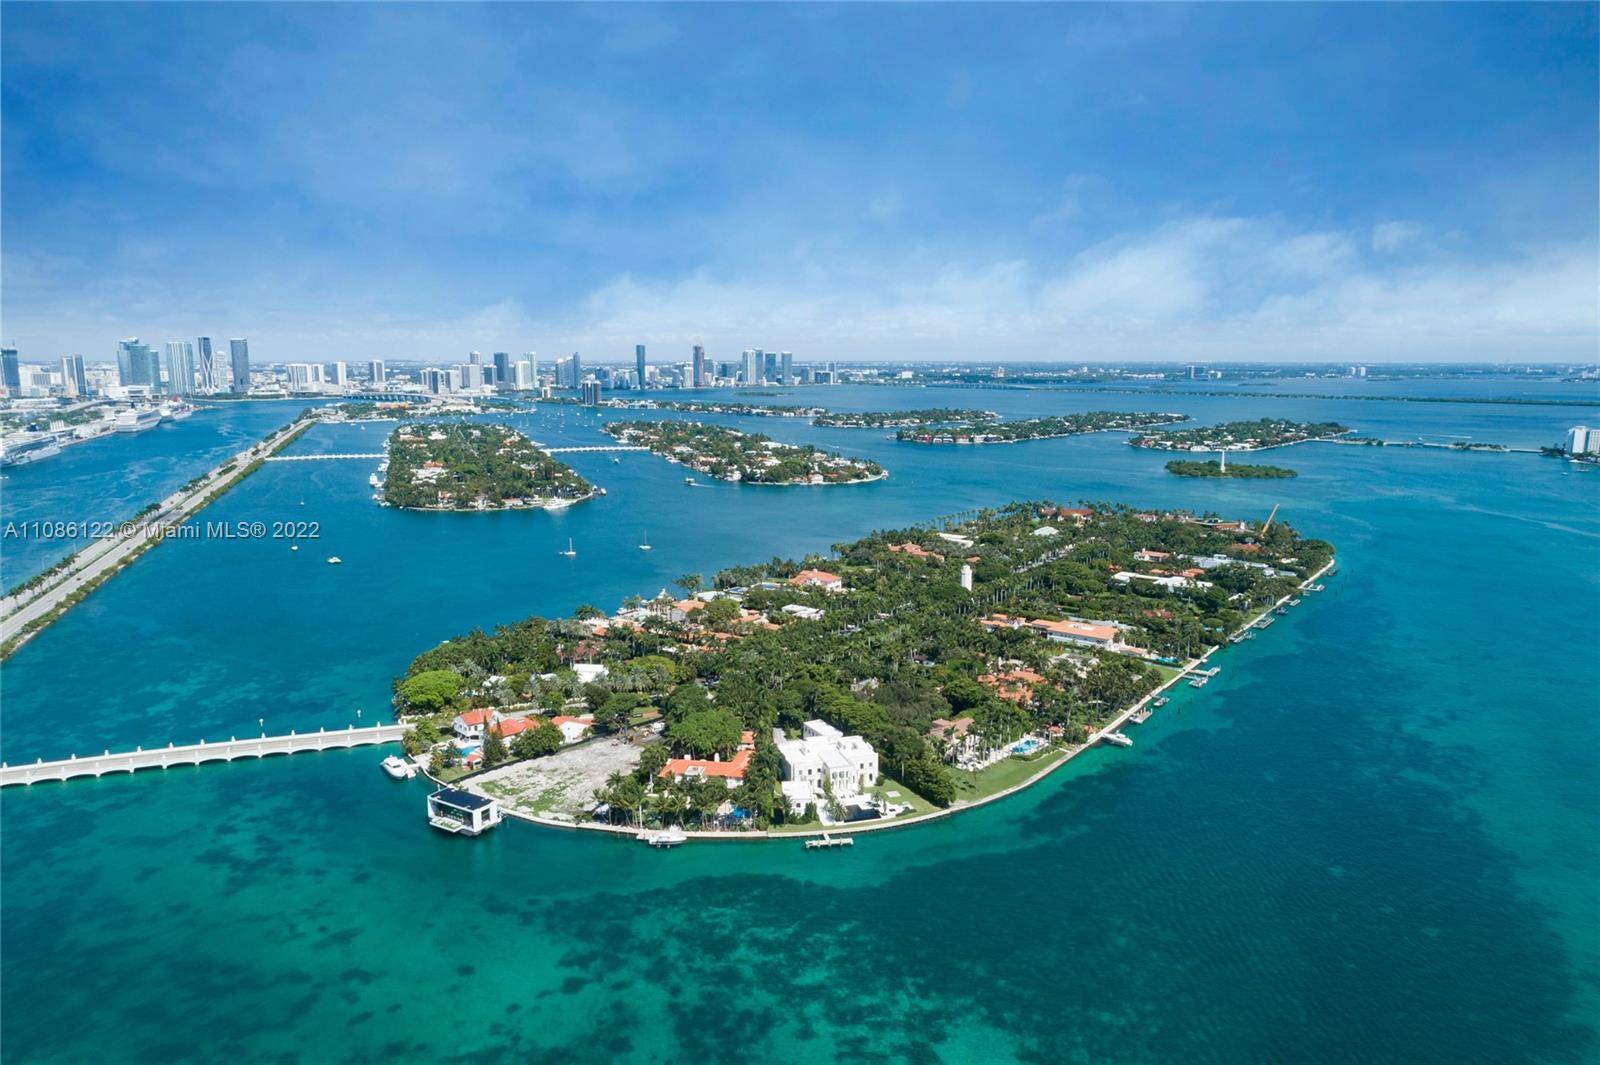 Now is the time to secure one of the last available opportunities to build your dream home on Miami s ultra exclusive island to the stars.